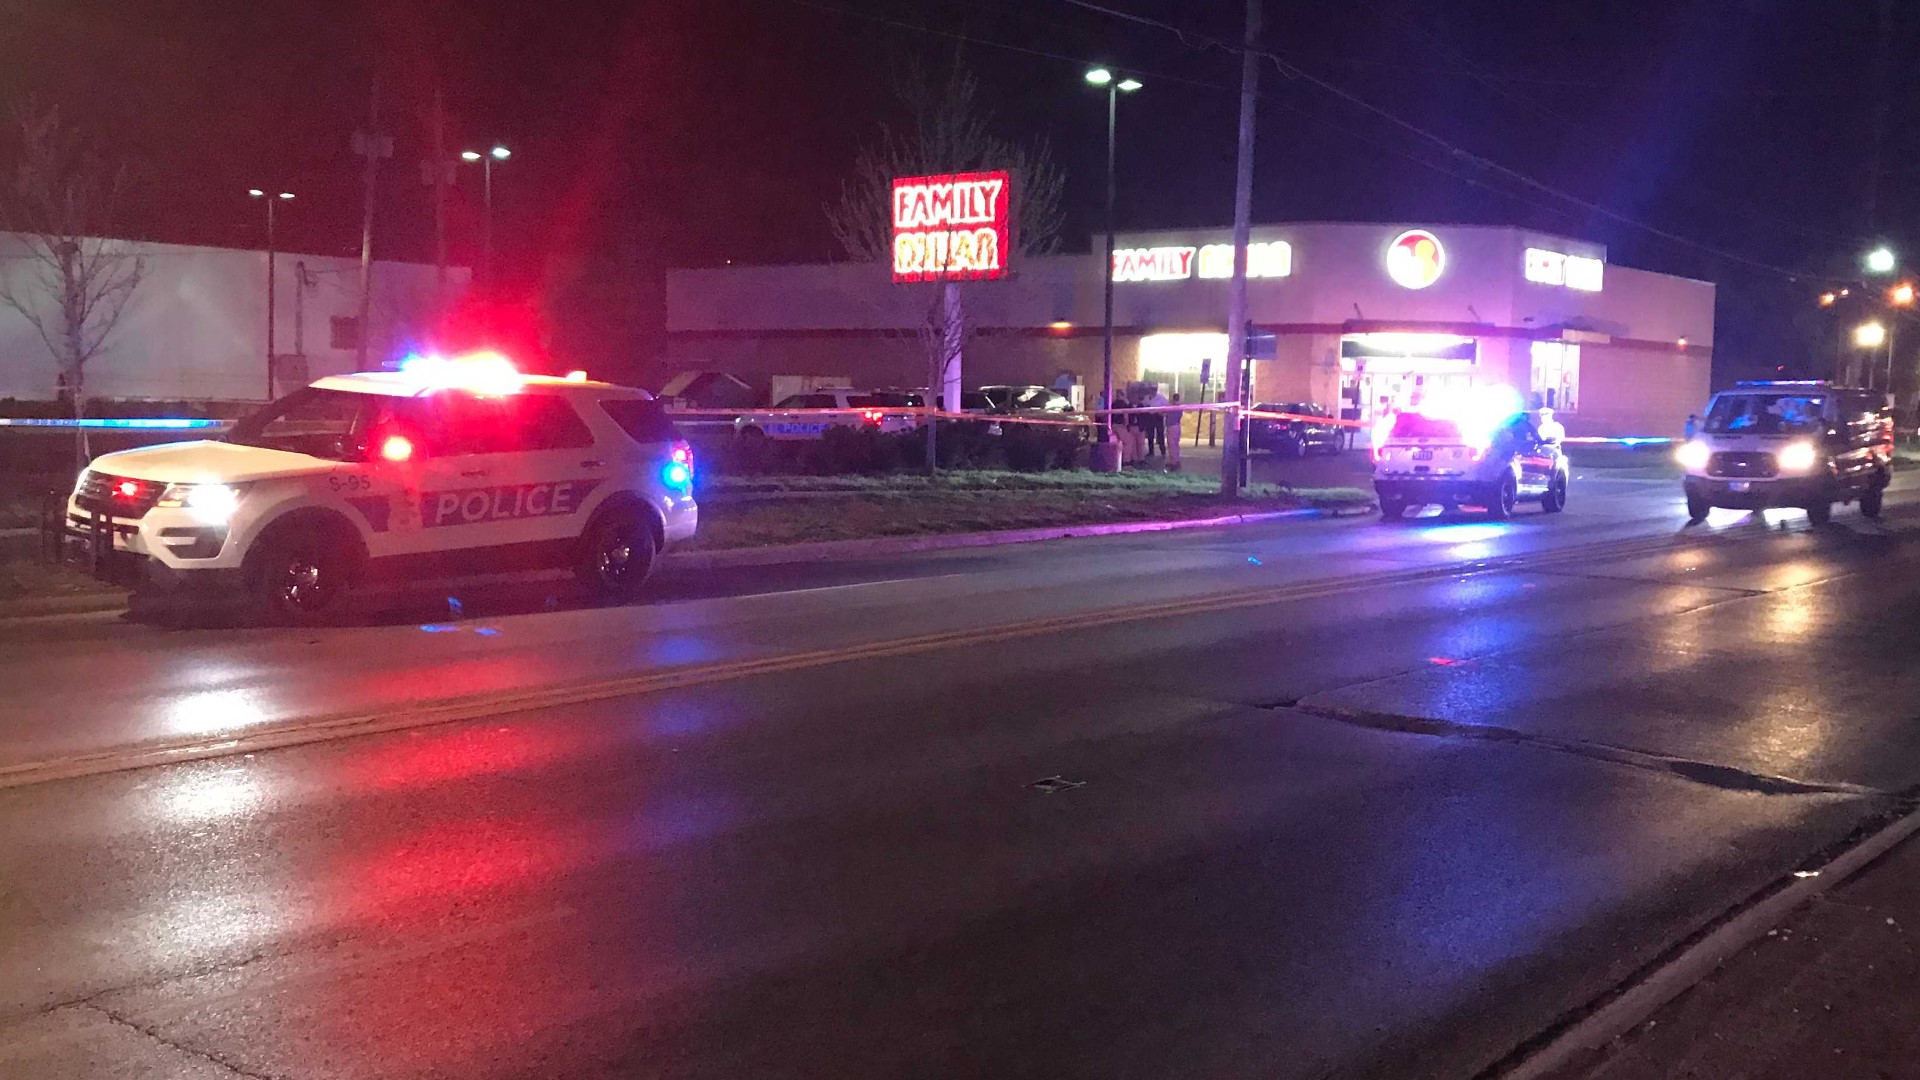 Officers were called to the area of East Livingston Avenue and South Nelson Road just after 9 p.m. for a report of a shooting.